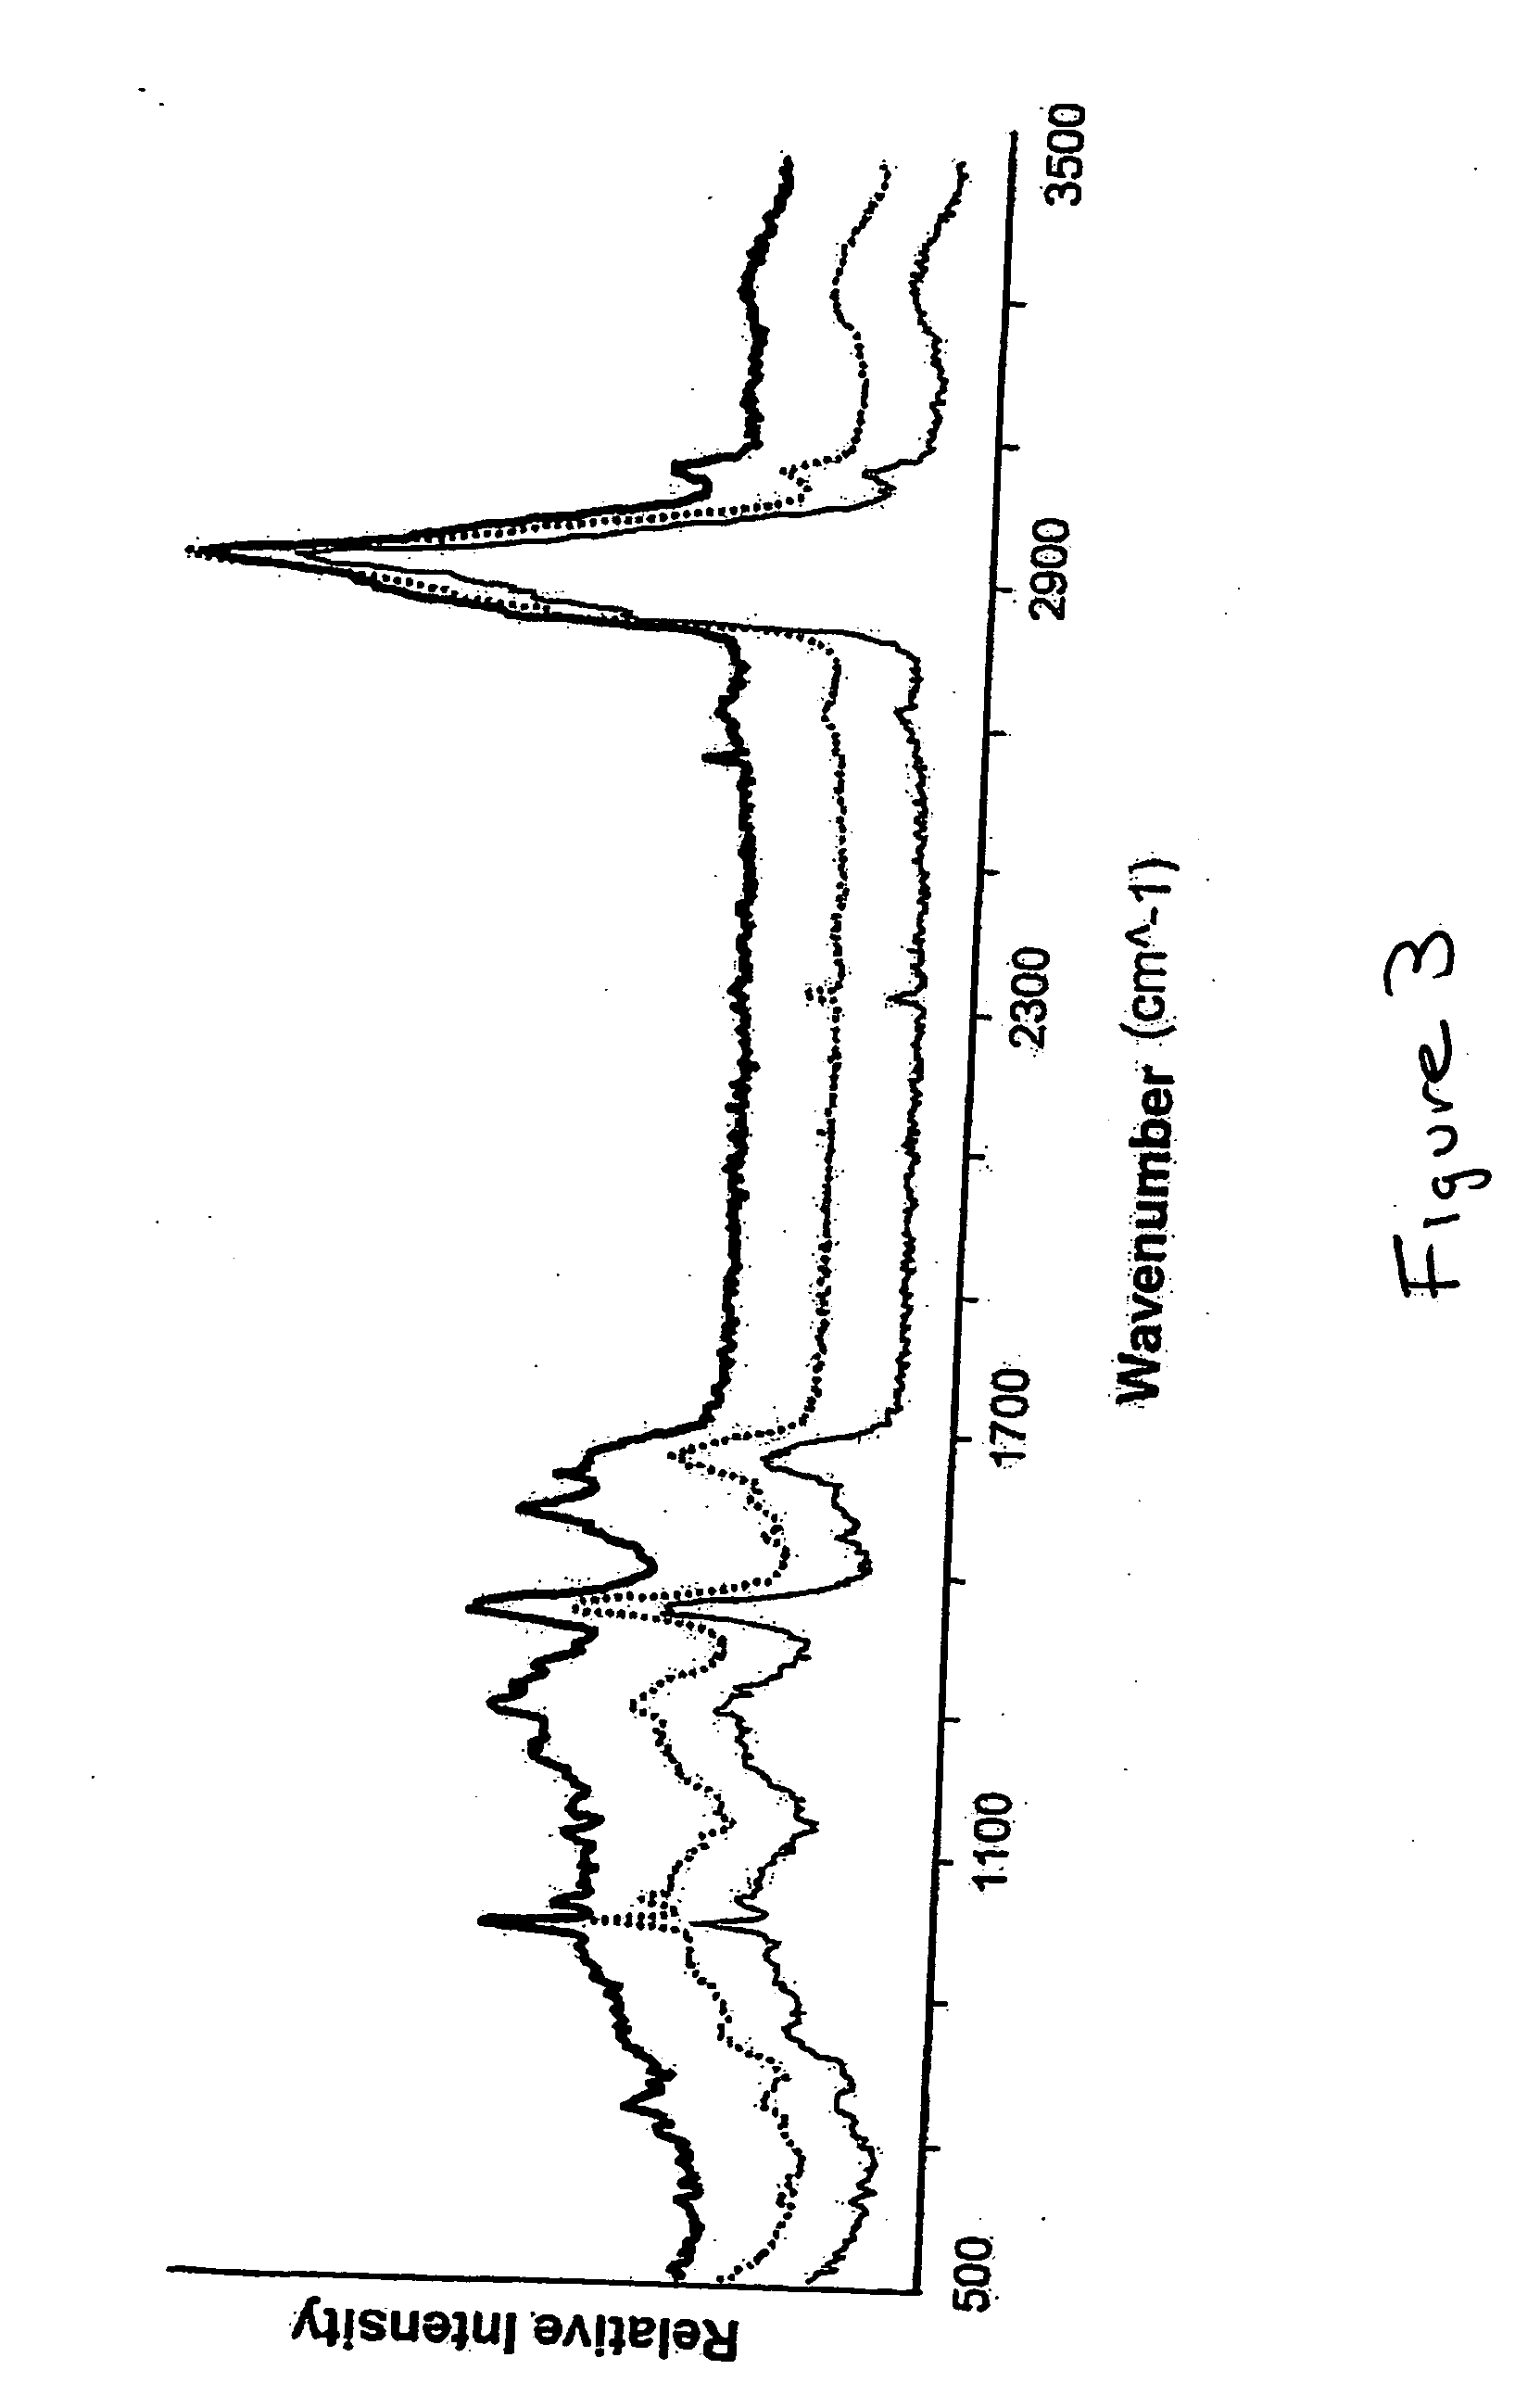 System and method for cytological analysis by raman spectroscopic imaging